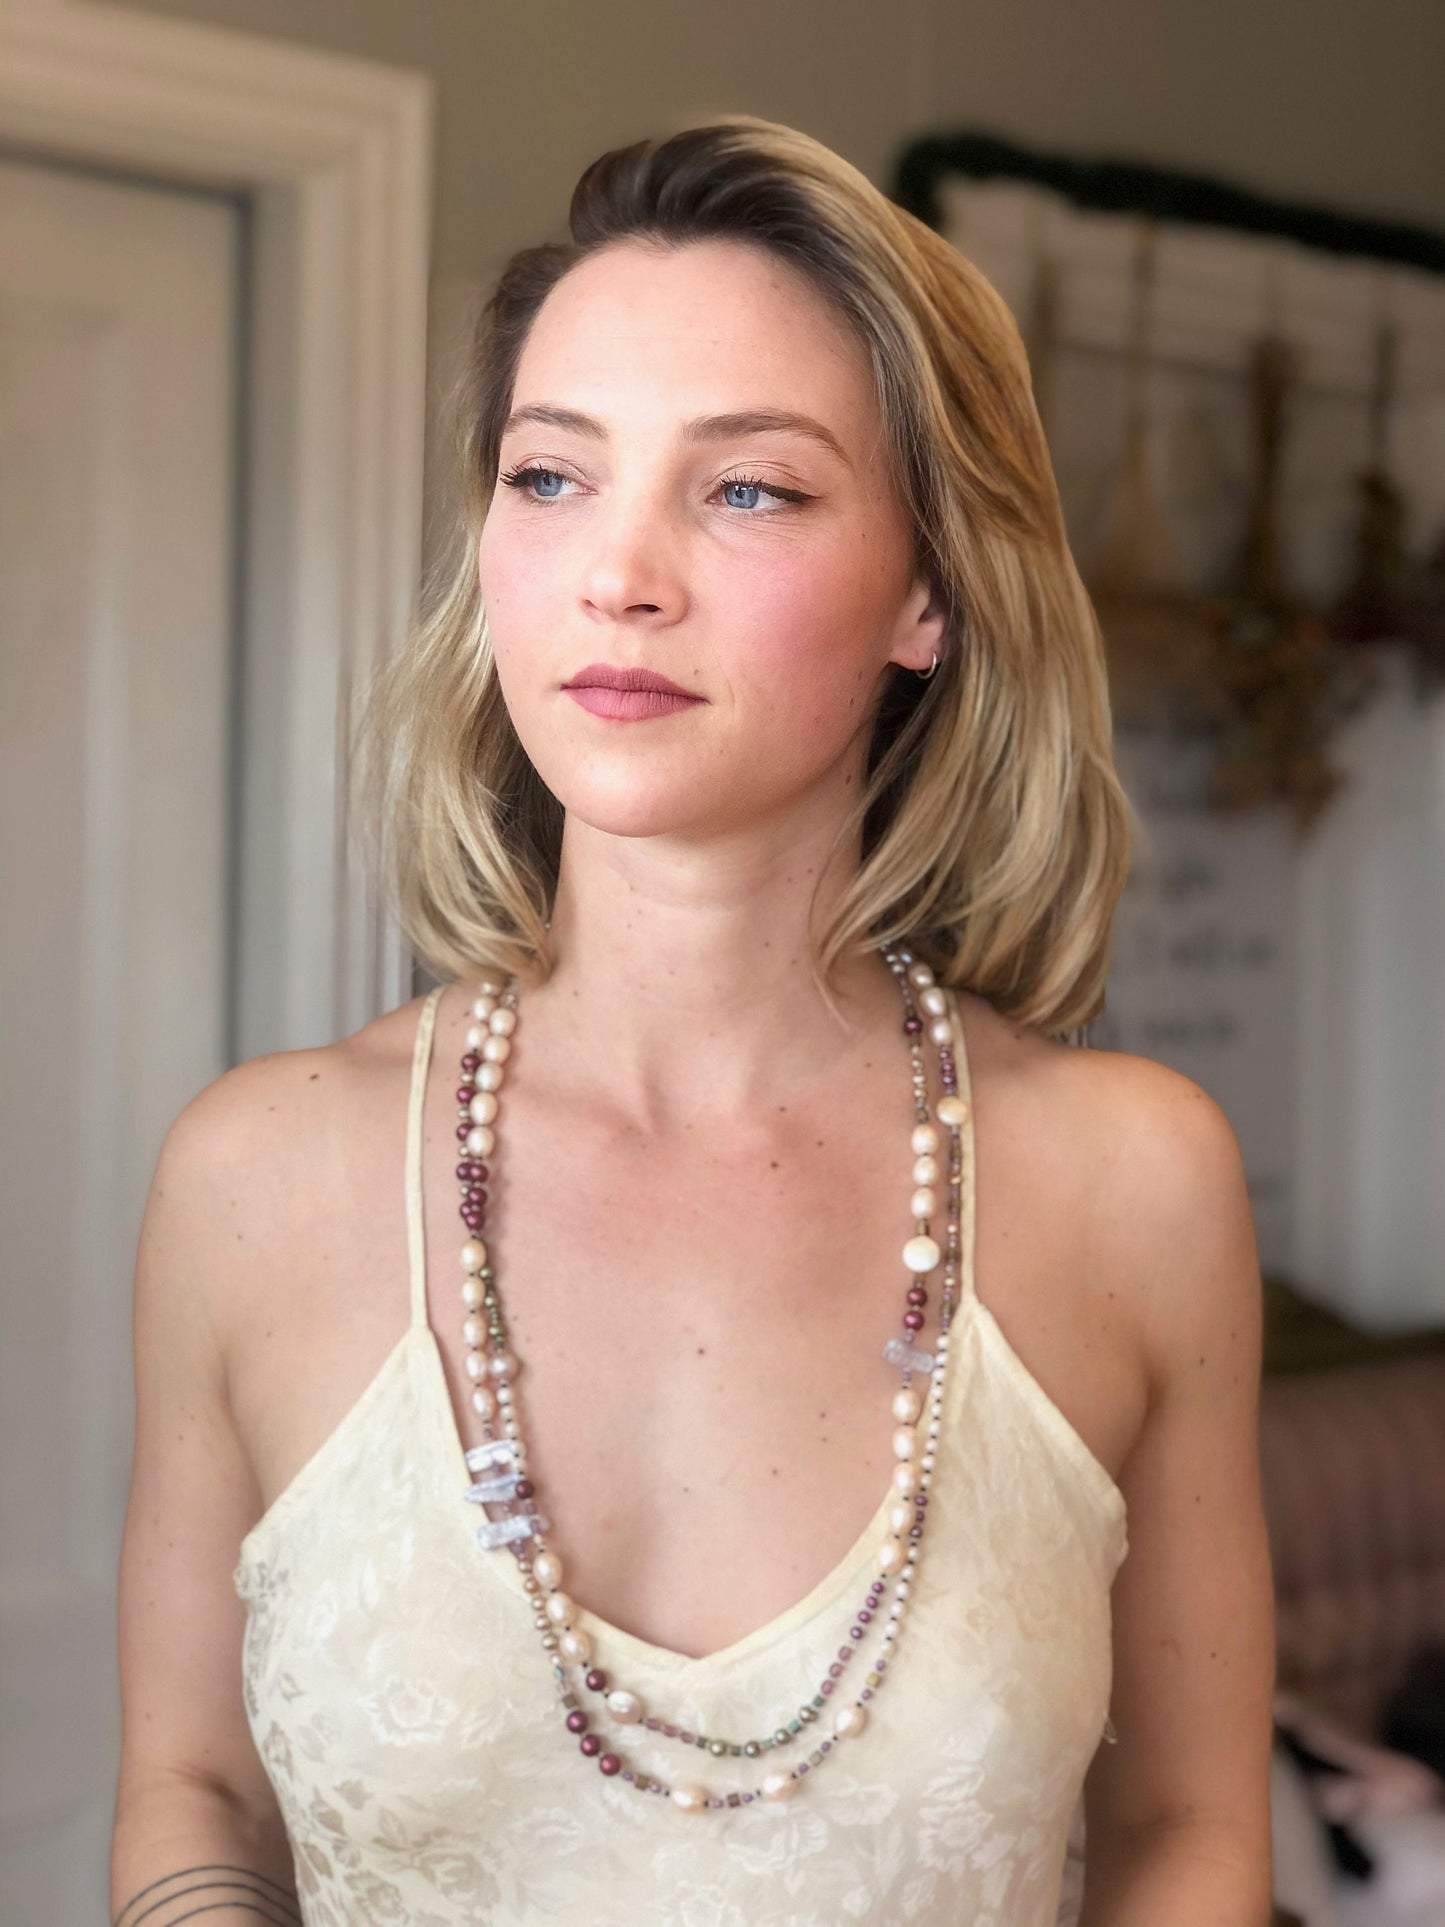 Long fresh water pearl necklace  Rows and rows of pearls are accented by crystals and quality sterling silver beads.